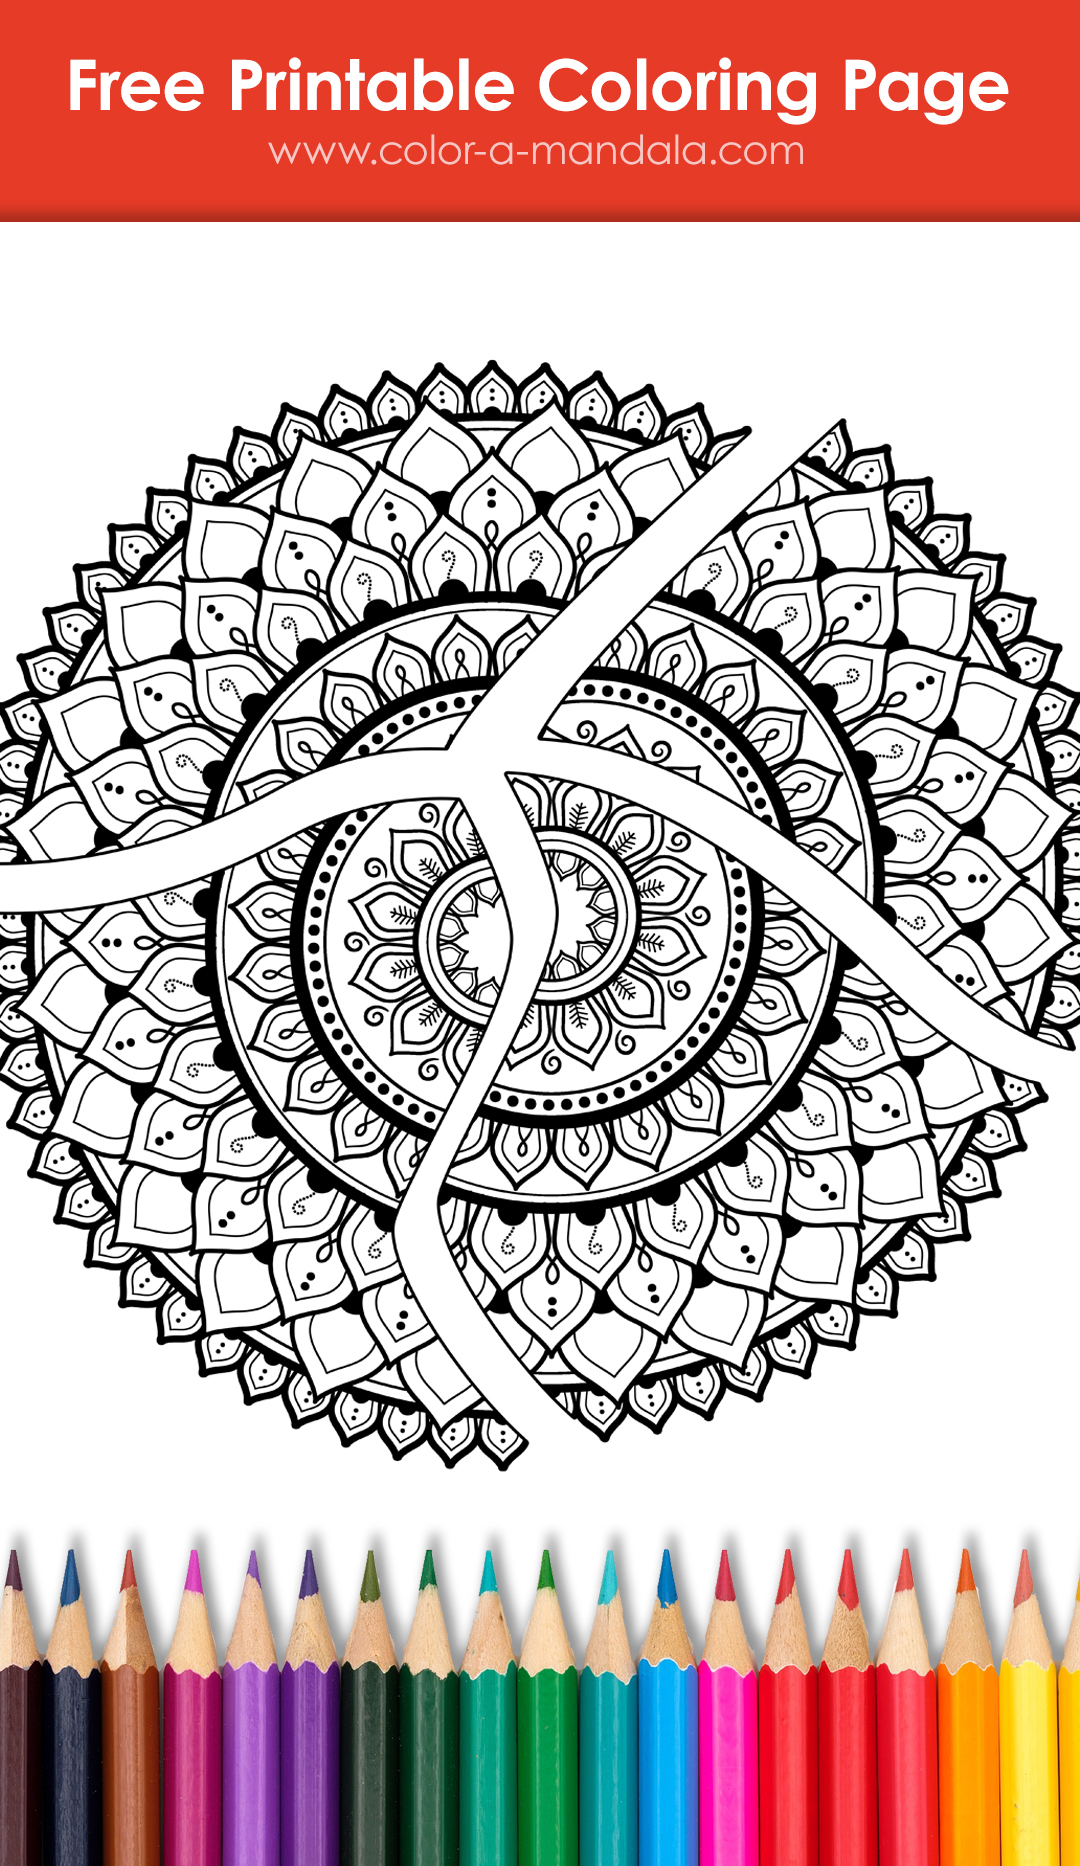 Image of an uncolored broken mandala coloring page.